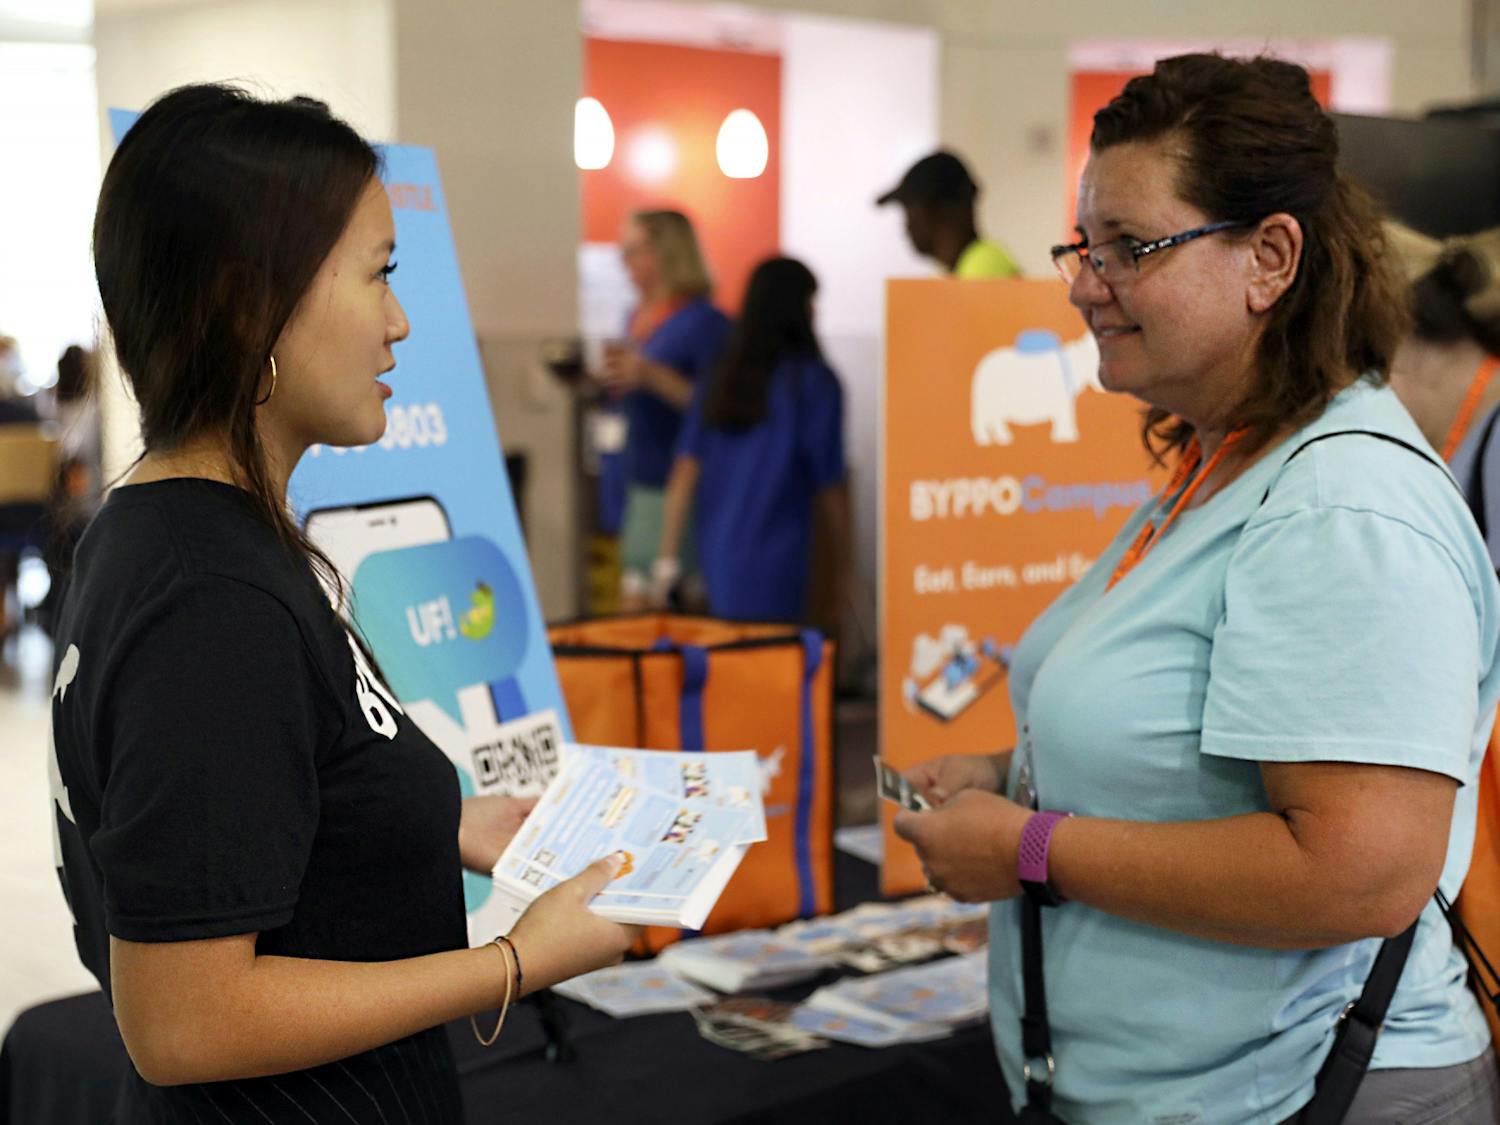 BYPPOCAMPUS founder and CEO Victoria Liu, (left) a UF accounting alumna, introduces her food delivery business to Stephanie Landini, (right) a parent of a UF student, at Gator Dining Center in Gainesville on Friday, July 9, 2021.